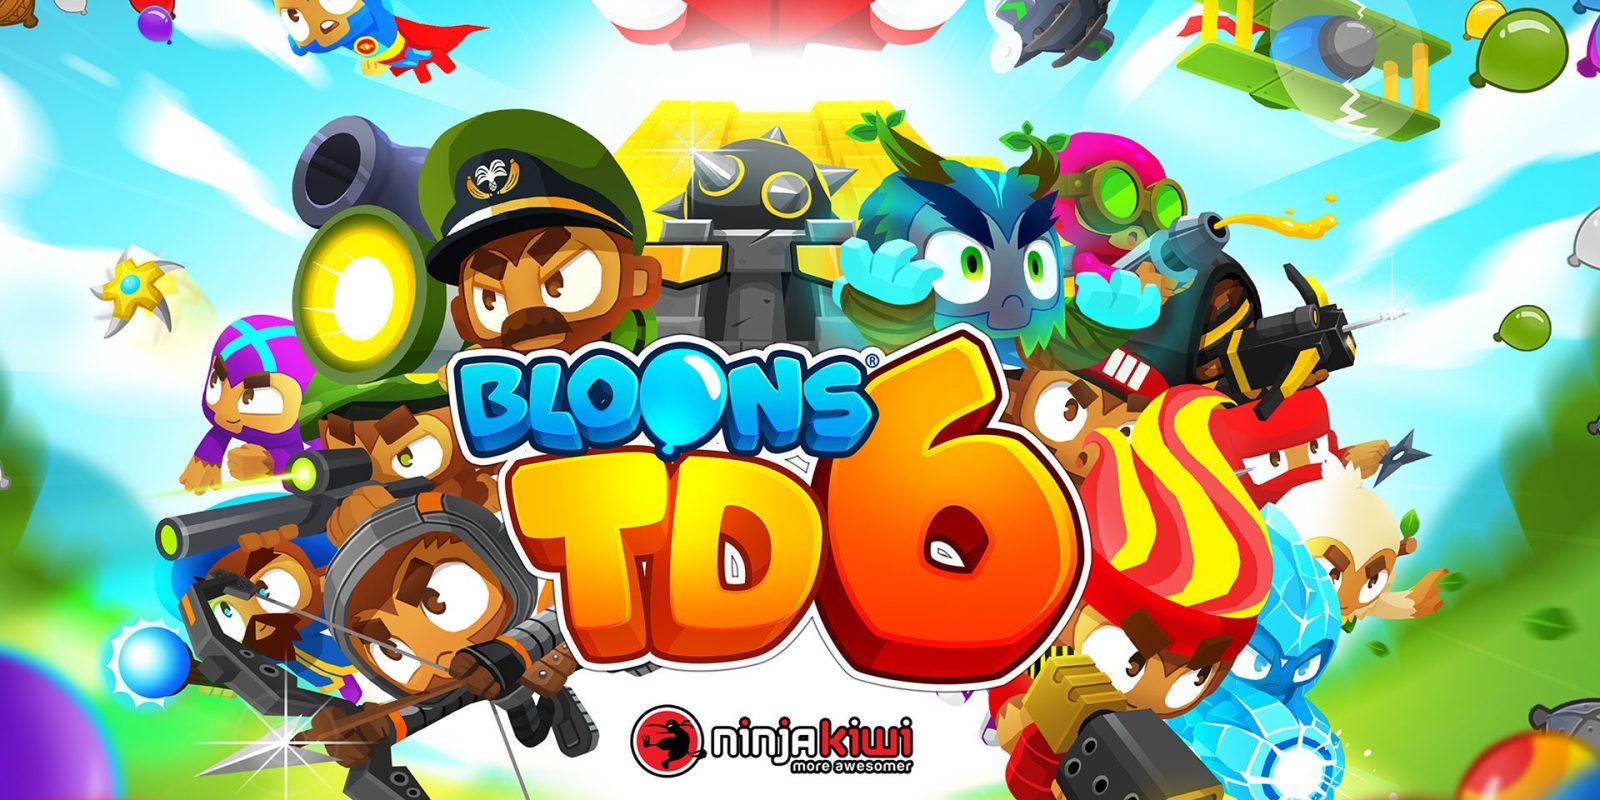 Download The Highly Rated Bloons Td 6 For Ios While It S Free Reg 5 9to5toys